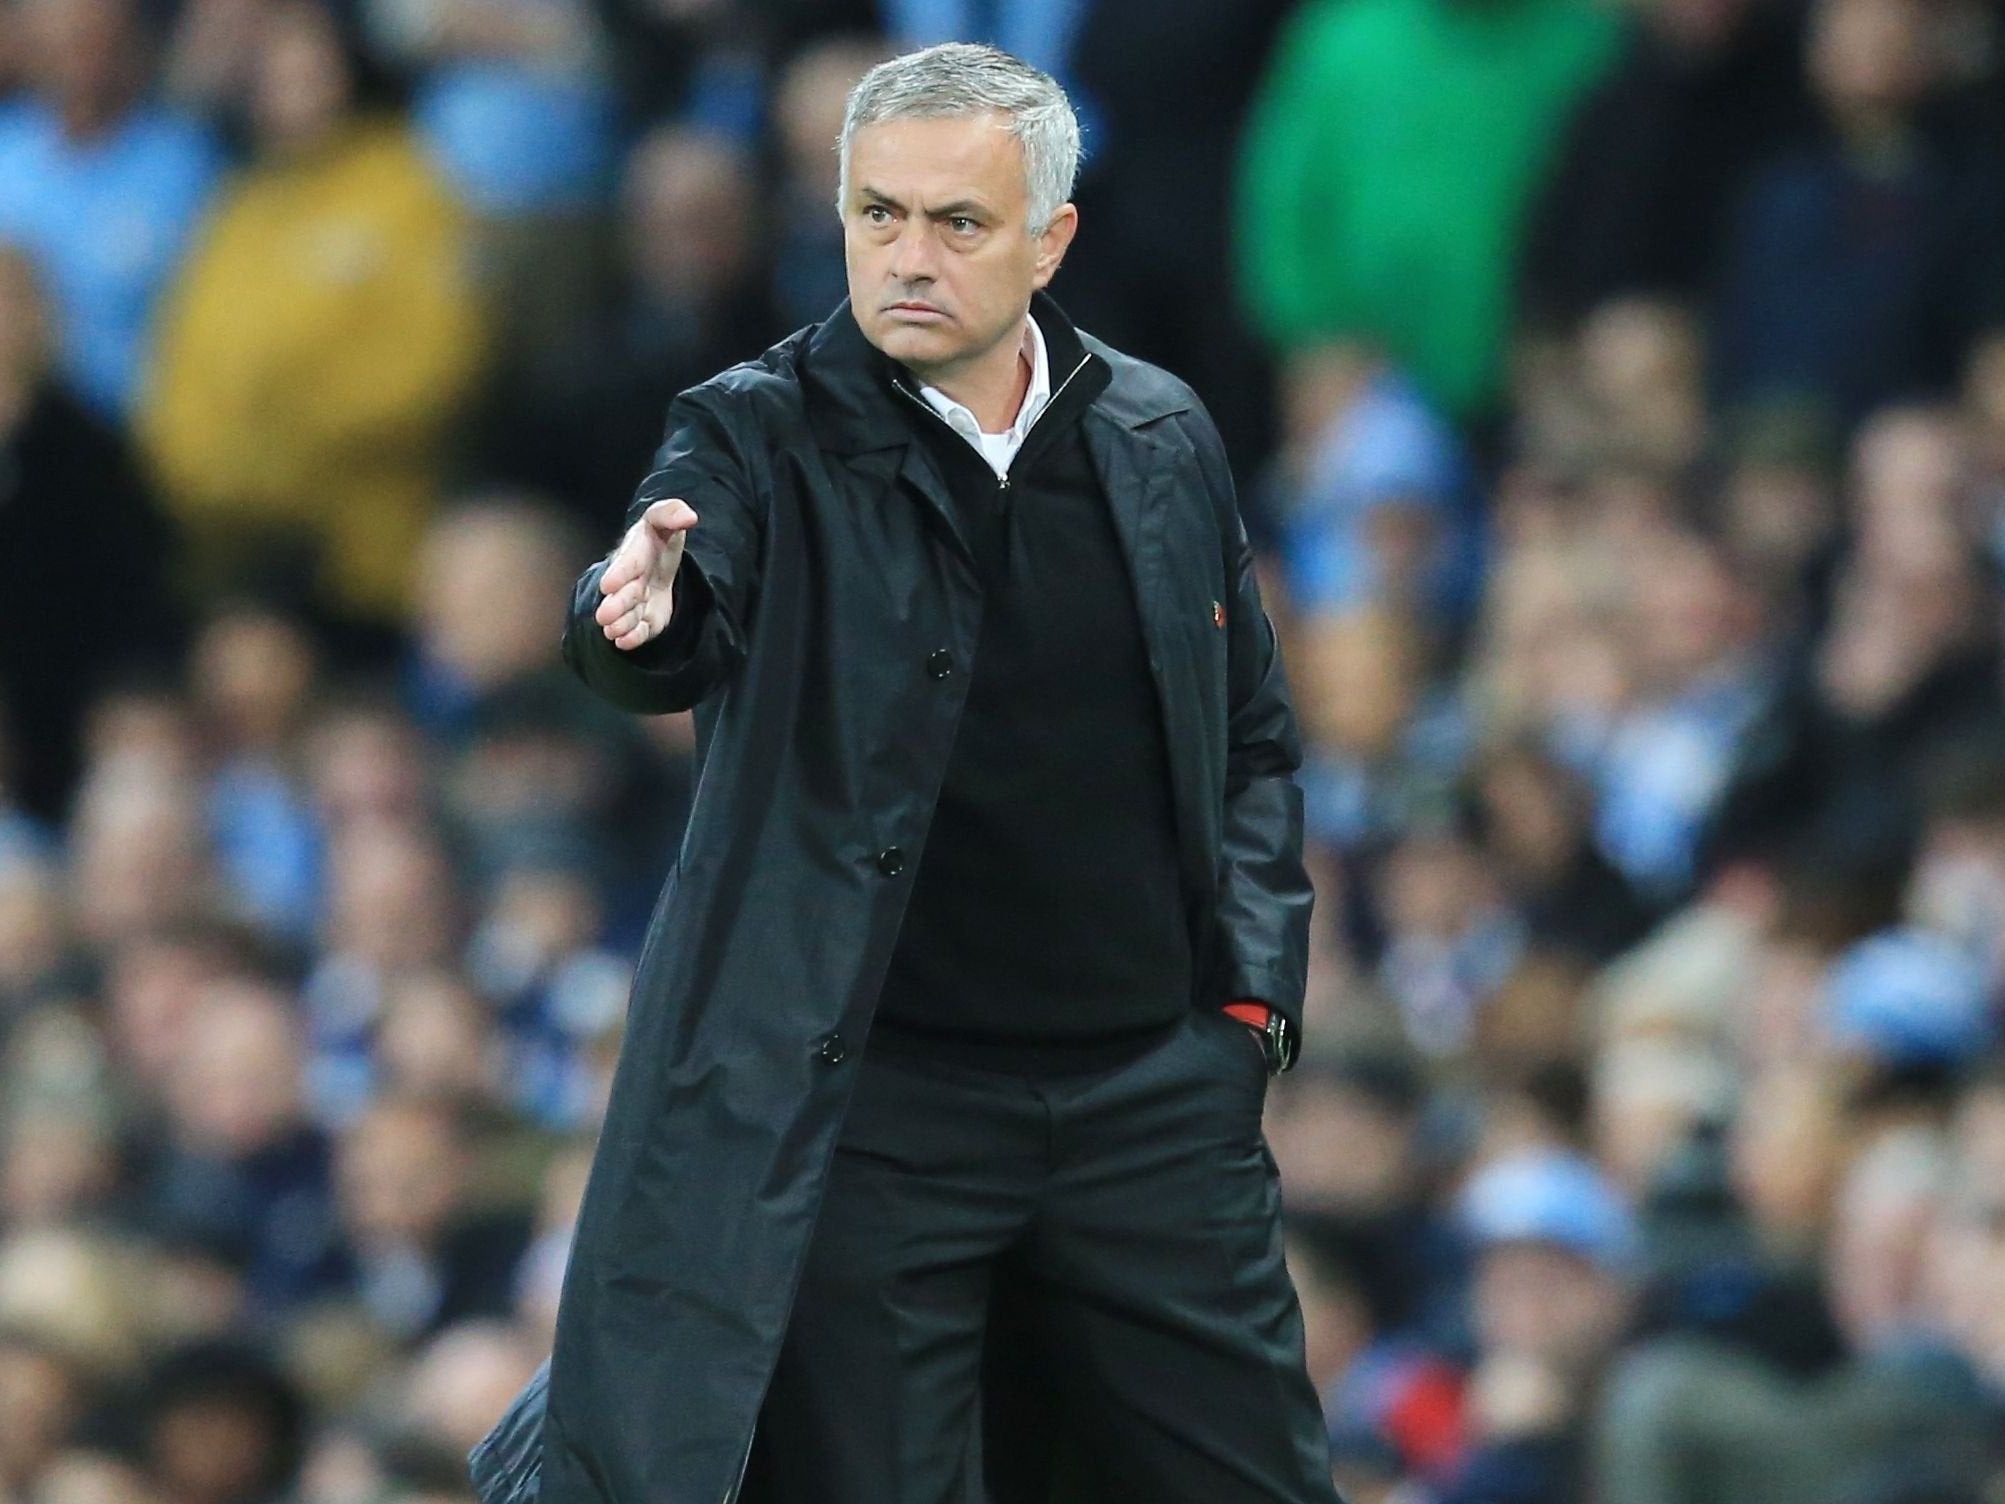 Jose Mourinho is struggling to get his Manchester United side to click this season